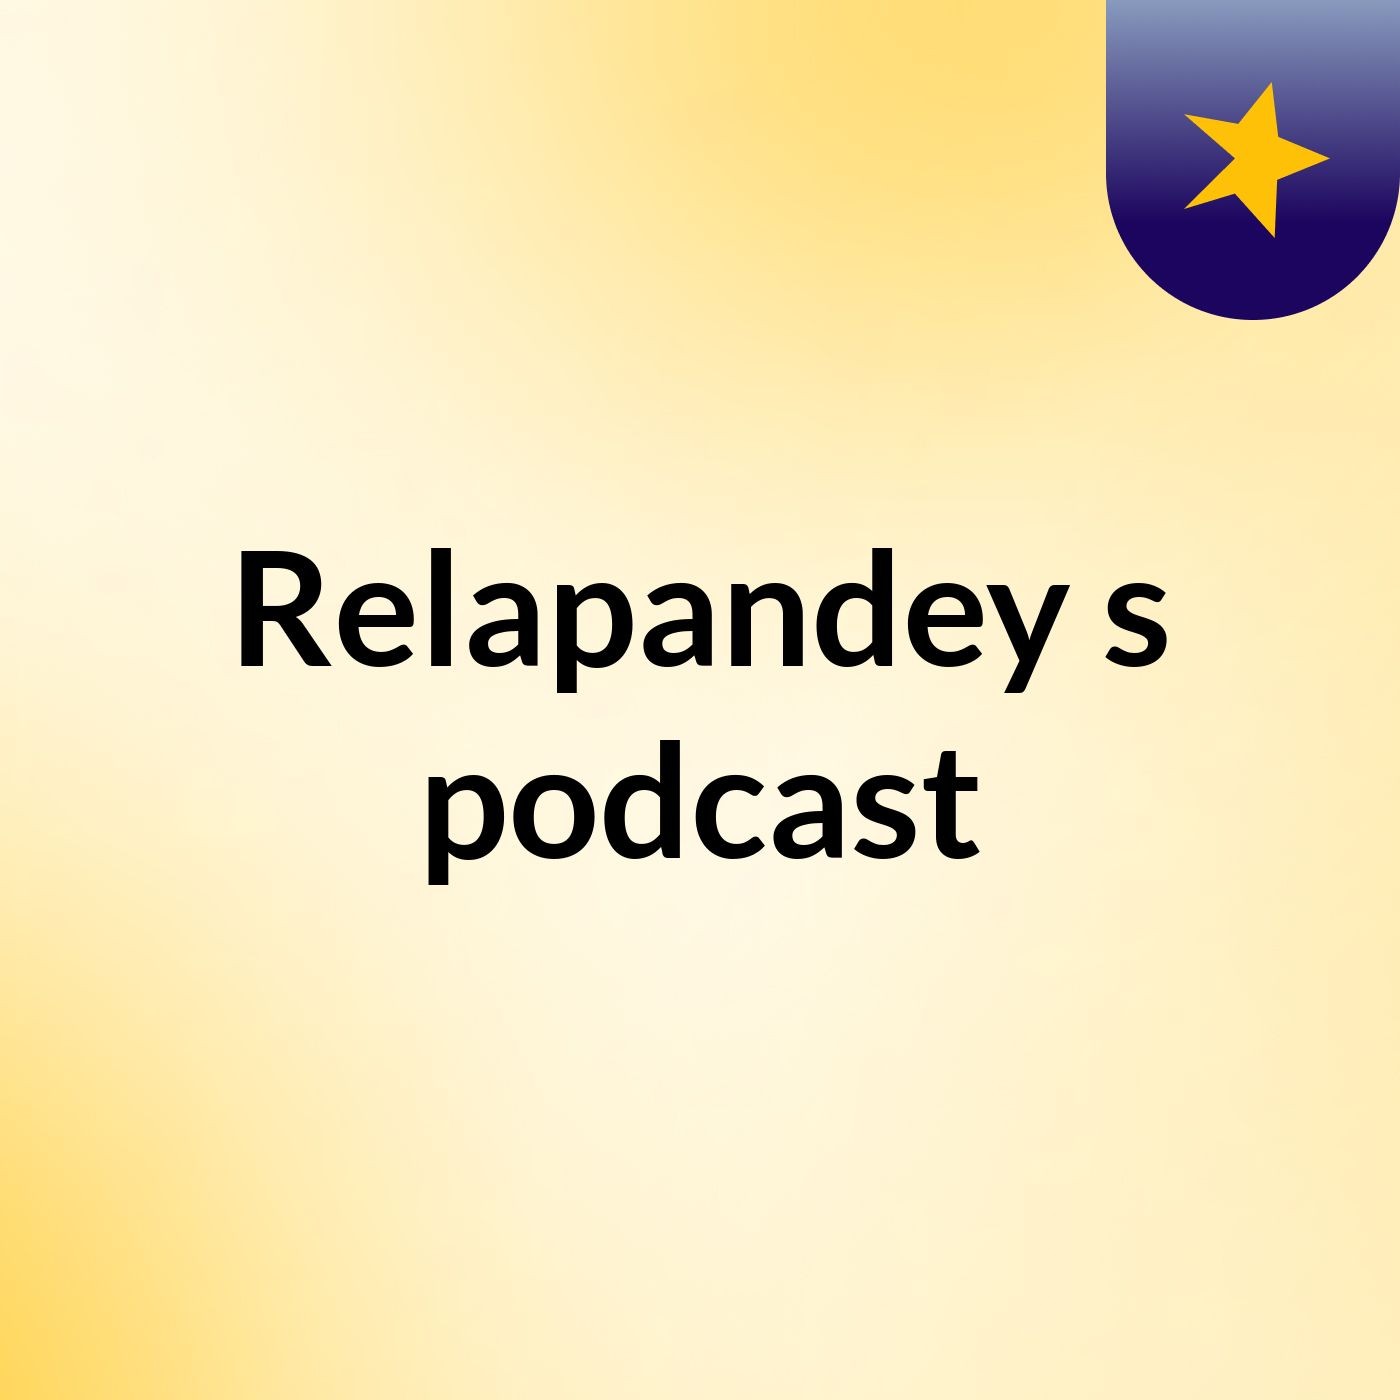 Relapandey's podcast